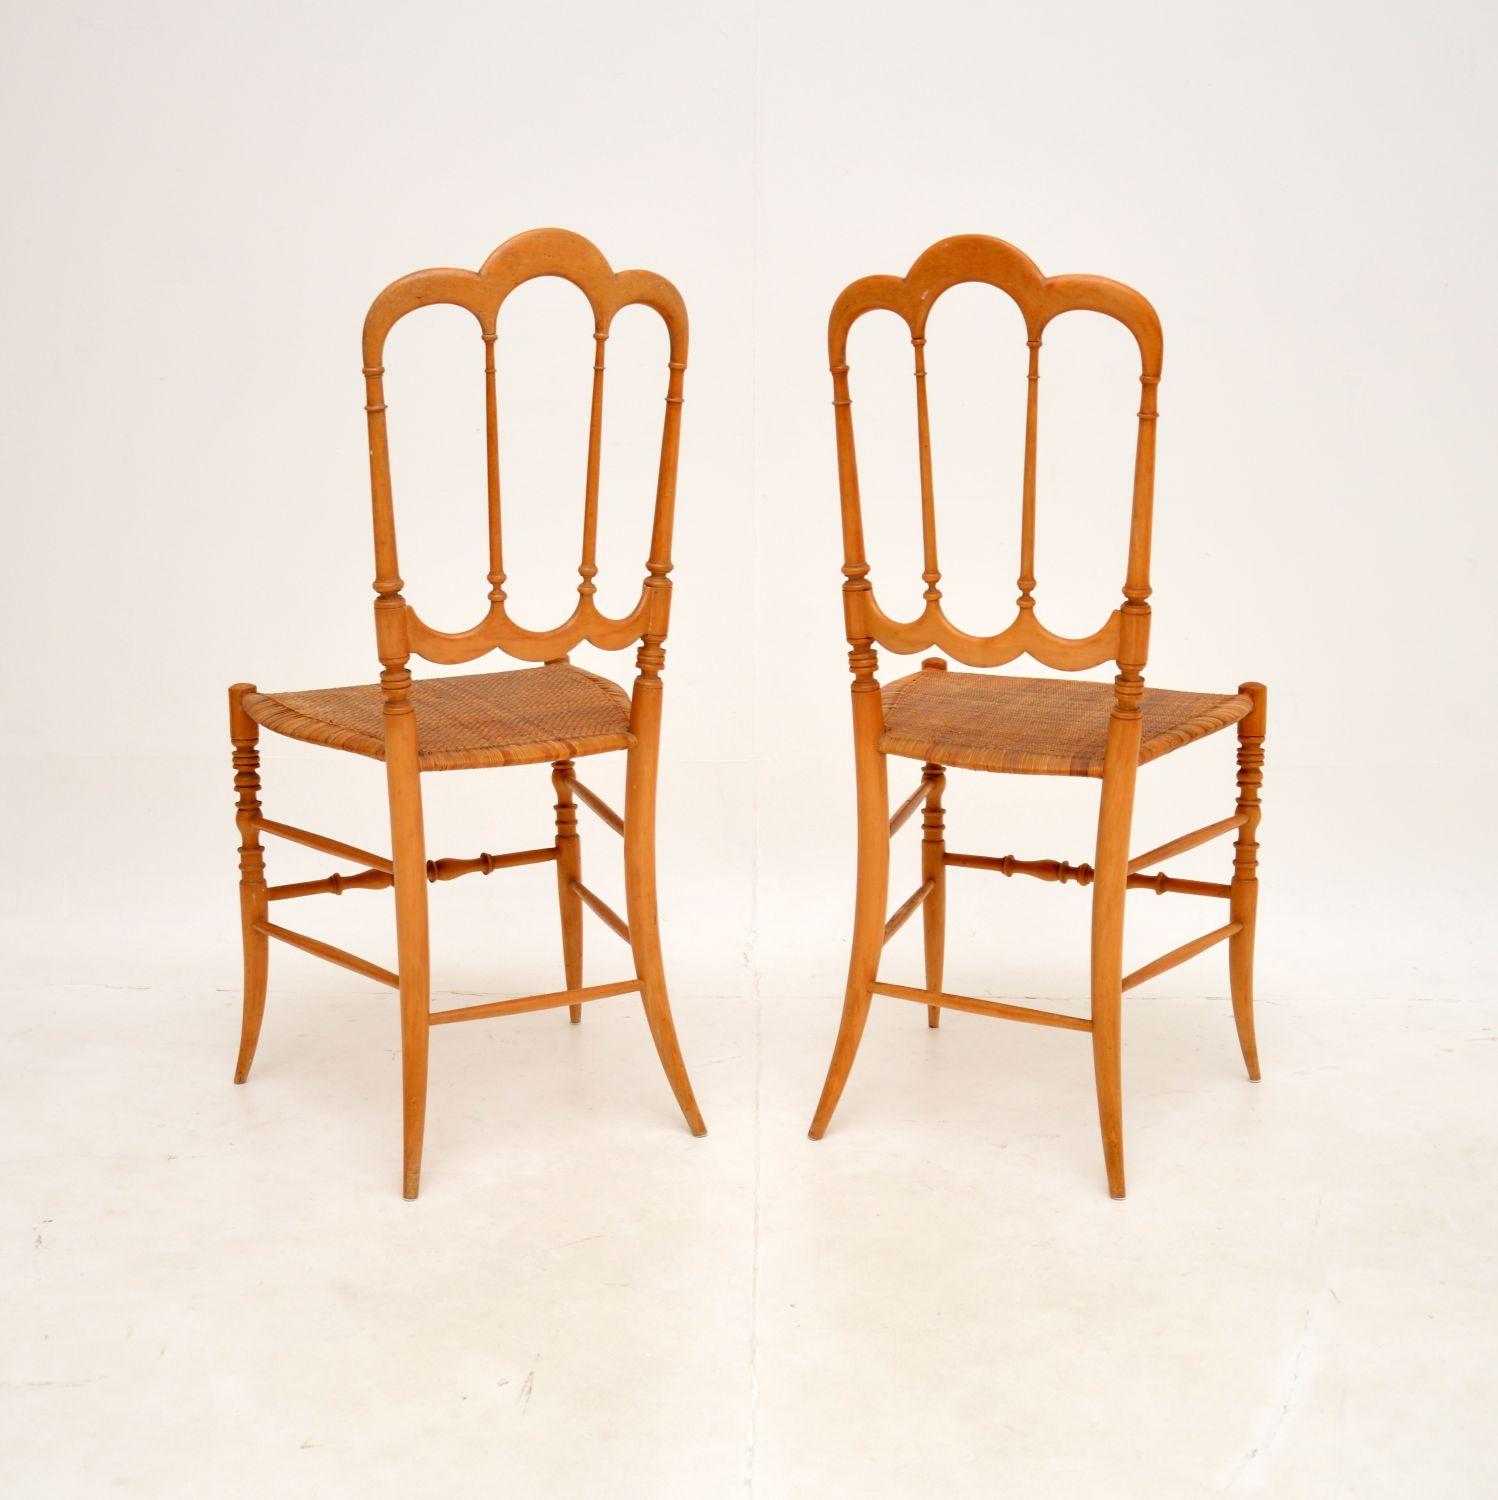 Pair of Vintage Italian ‘Tre Archi’ Chiavari Chairs by Fratelli Levaggi In Good Condition For Sale In London, GB